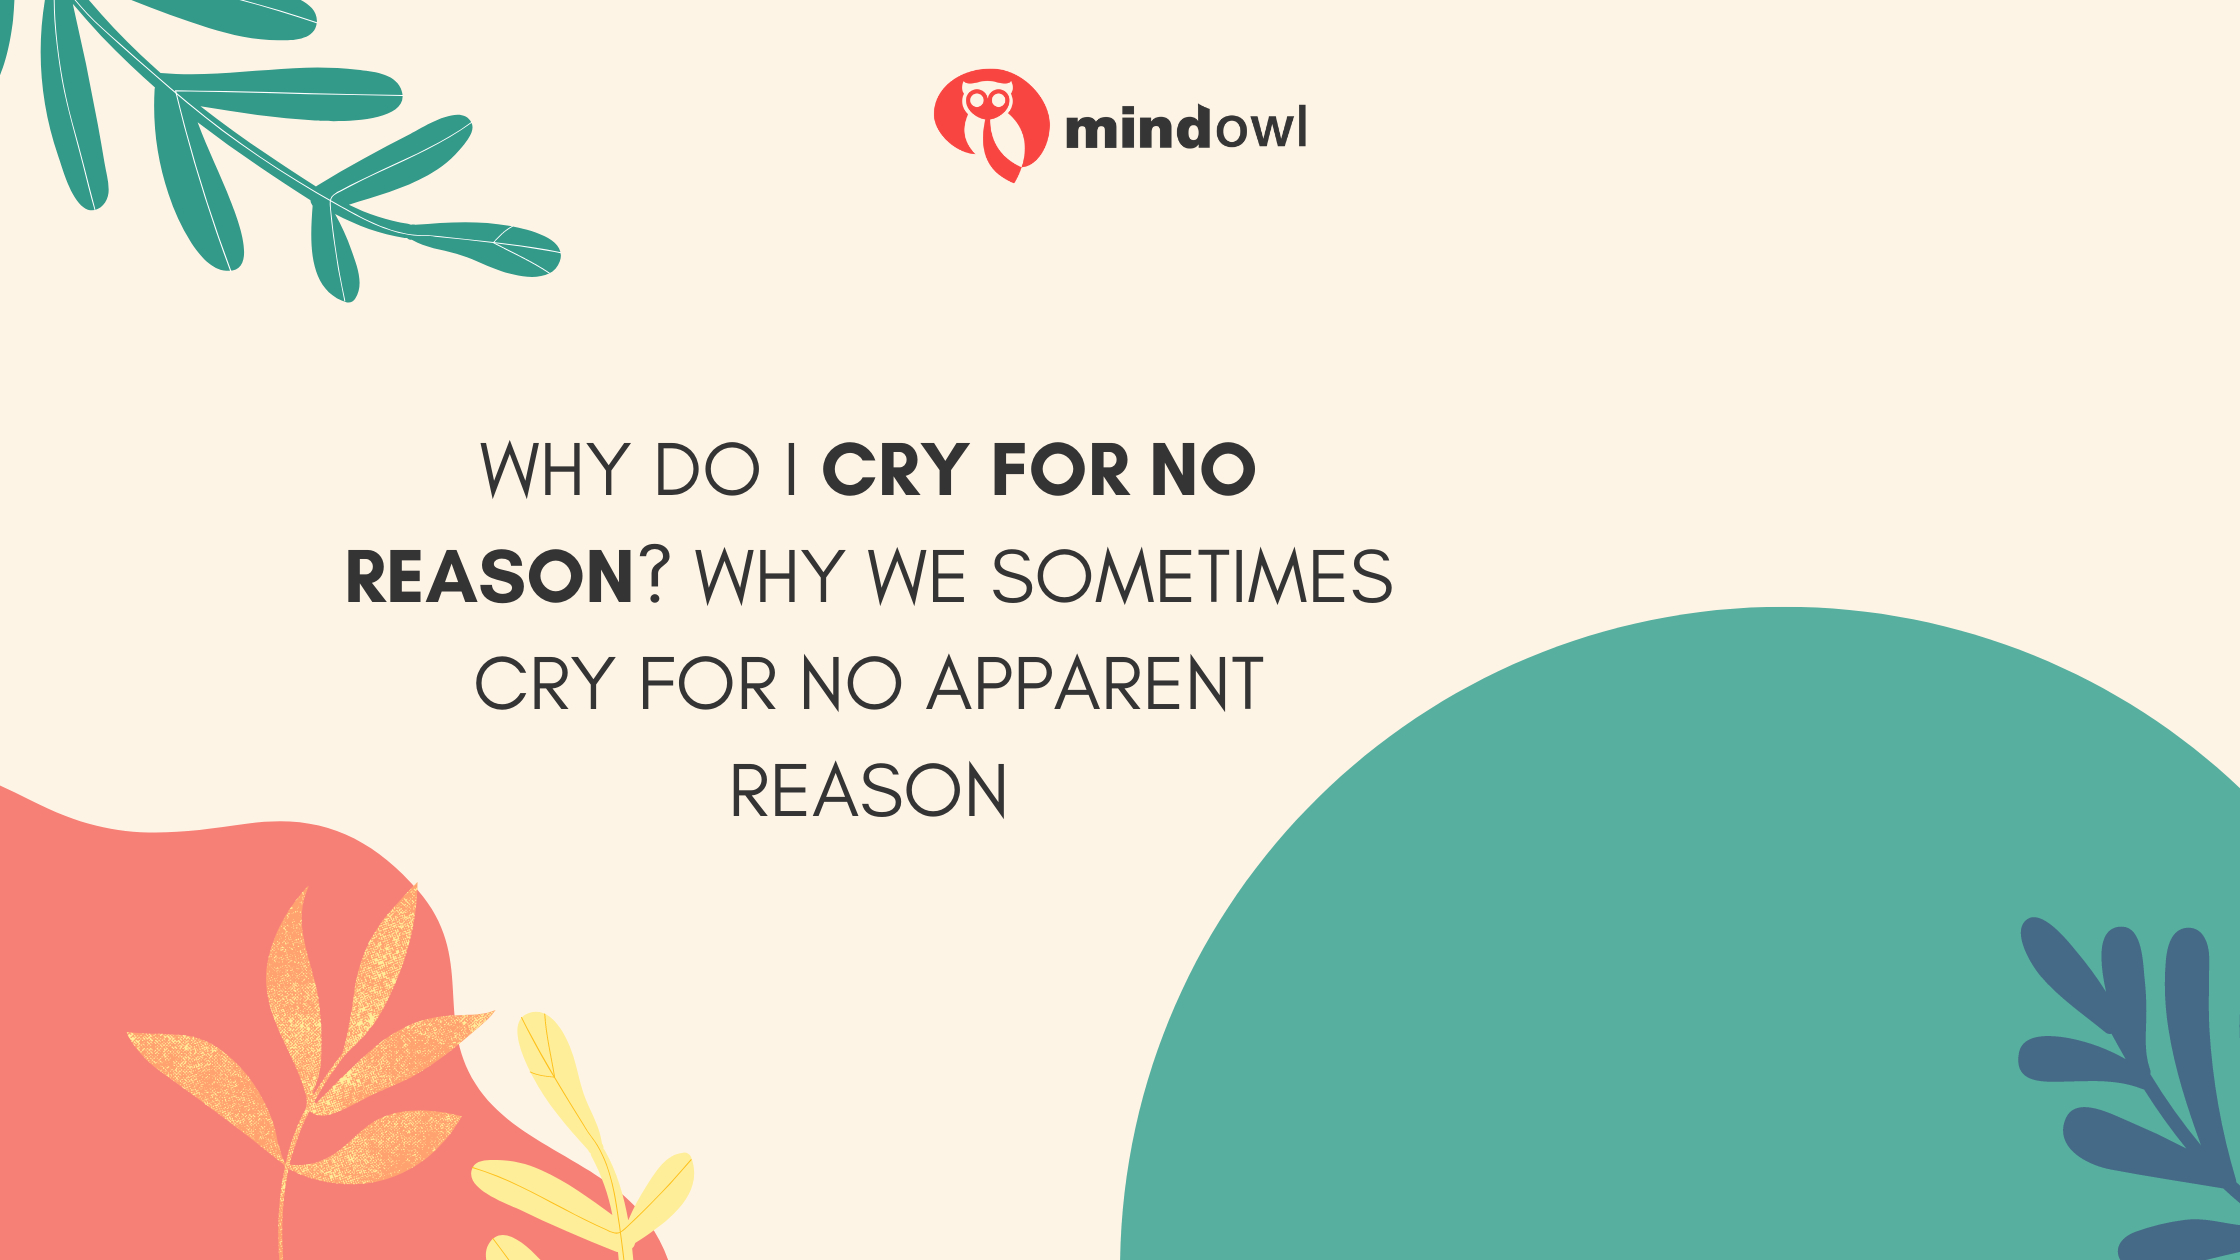 Why Do I Cry For No Reason? Why We Sometimes Cry for No Apparent Reason